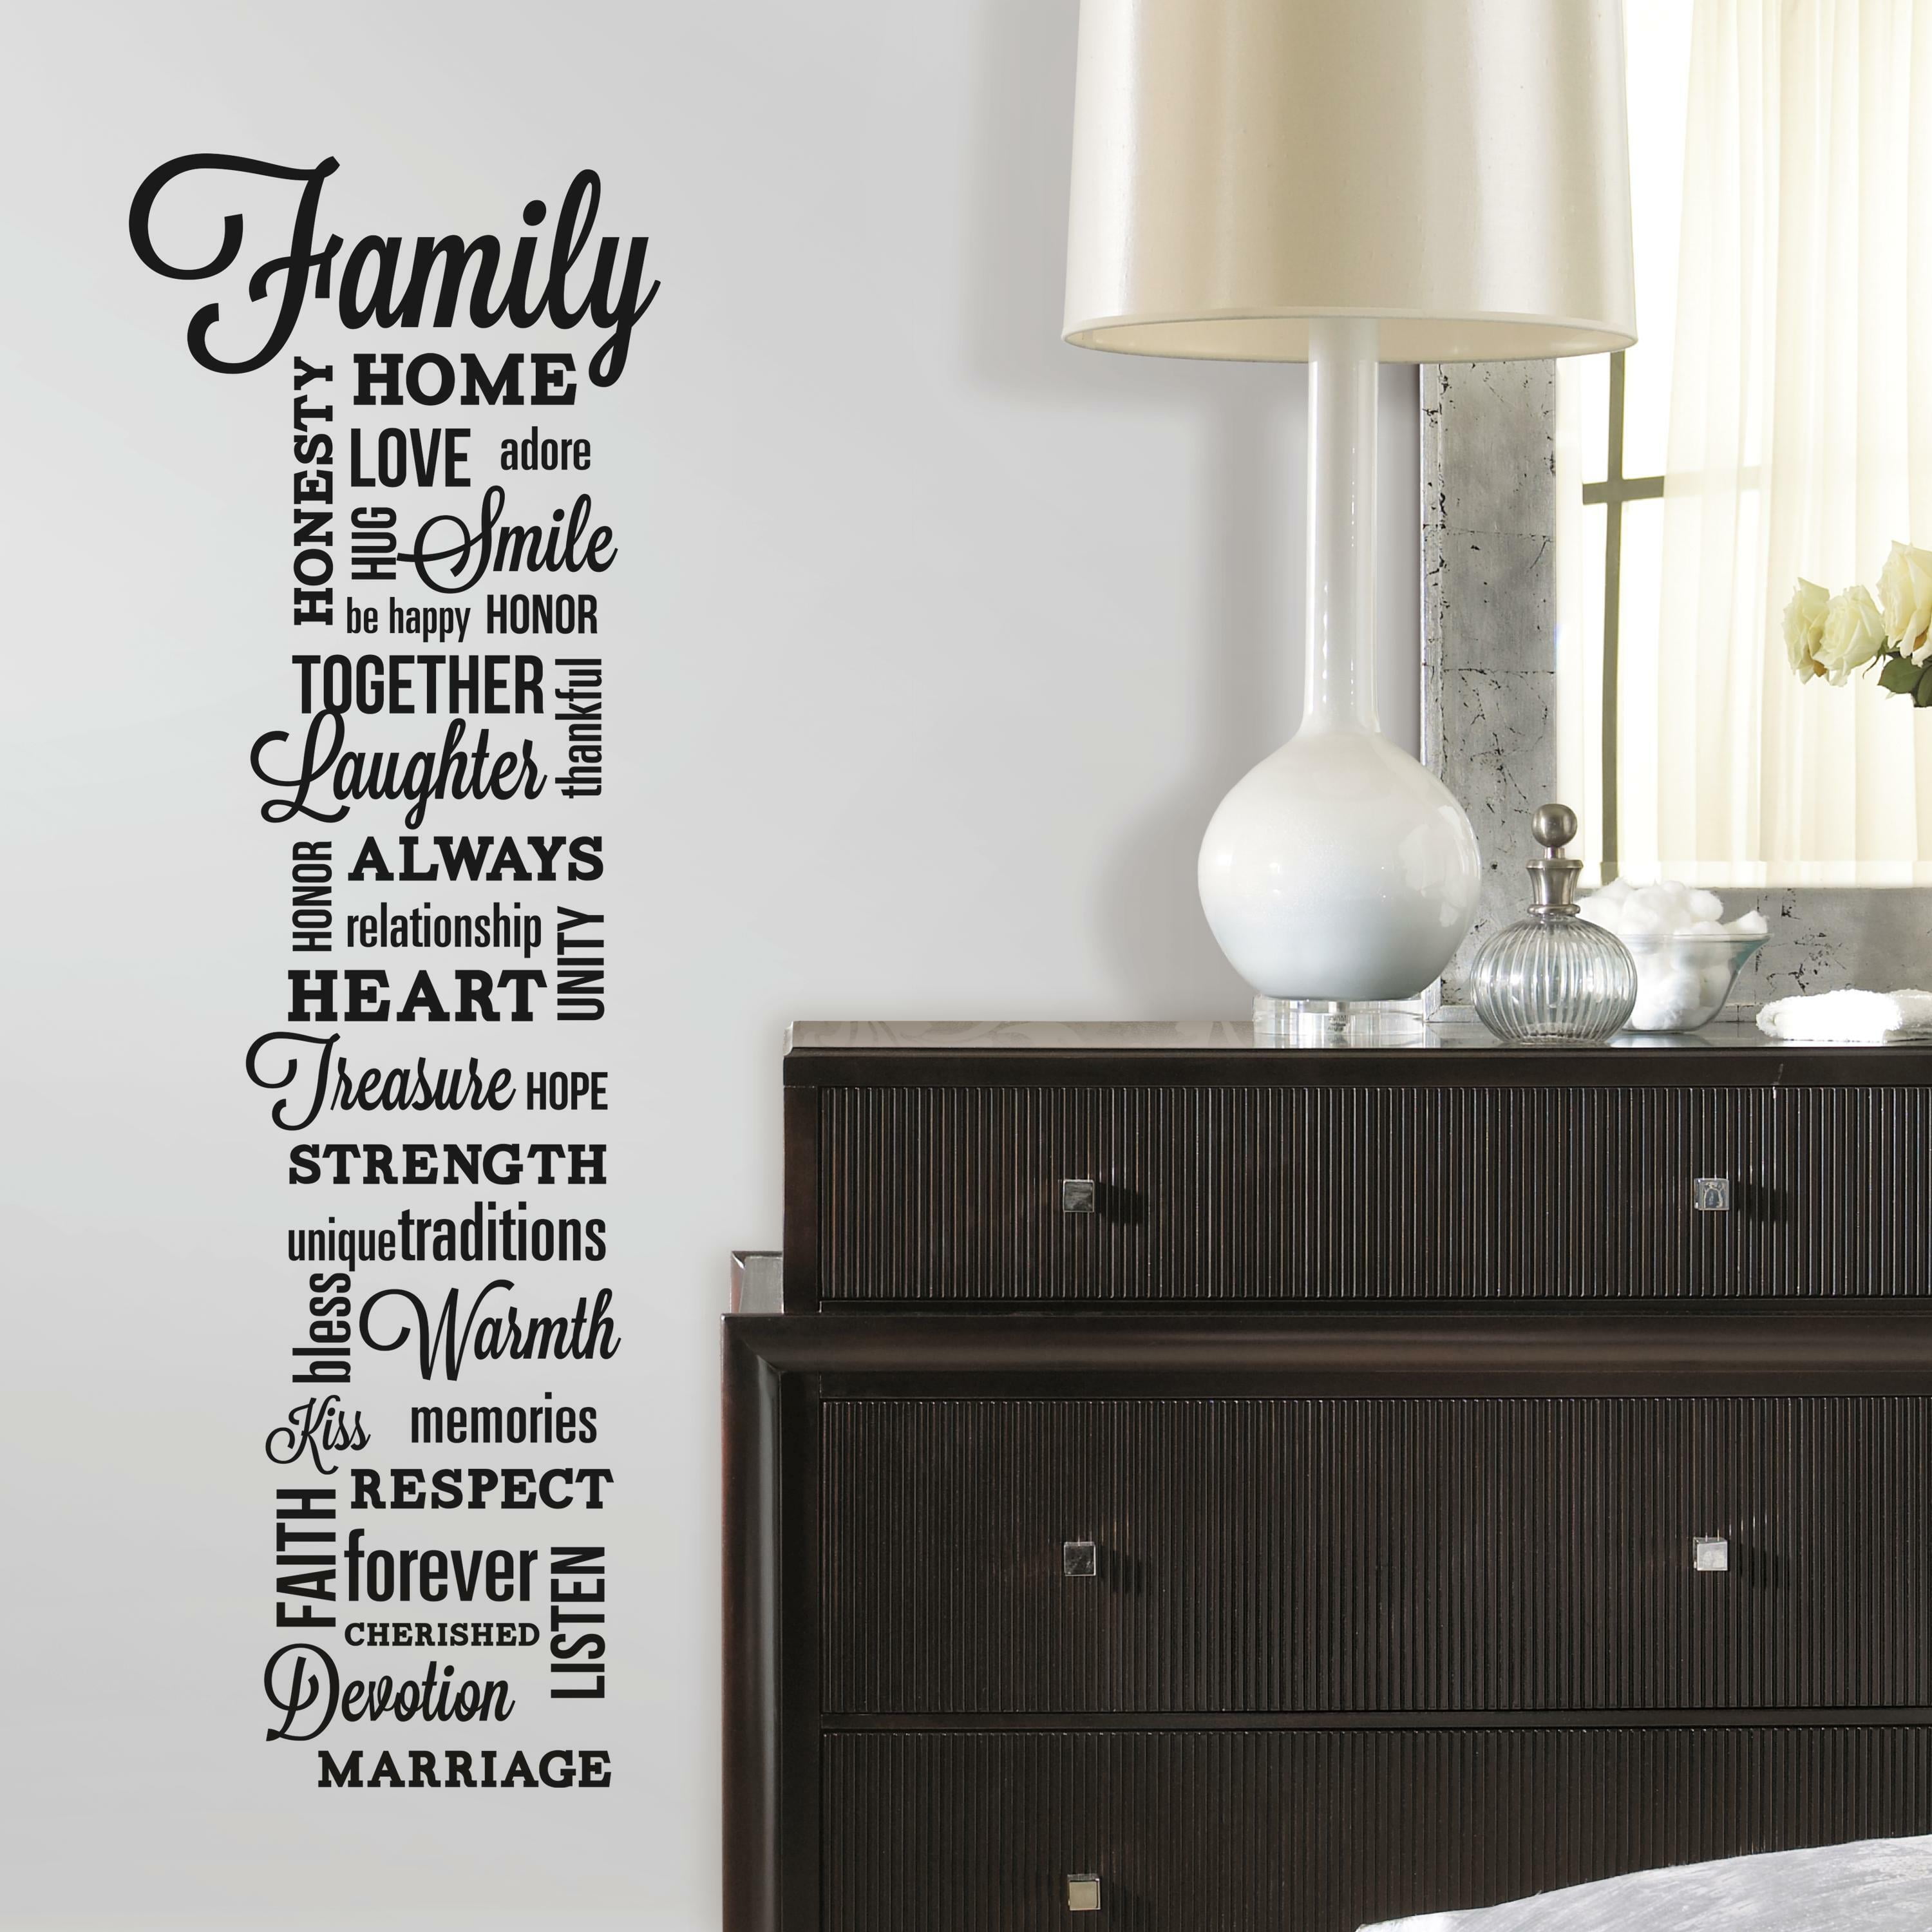 Together we make a Family Hearts Love Room Wall Vinyl Sticker Quote Decal nBLACK 